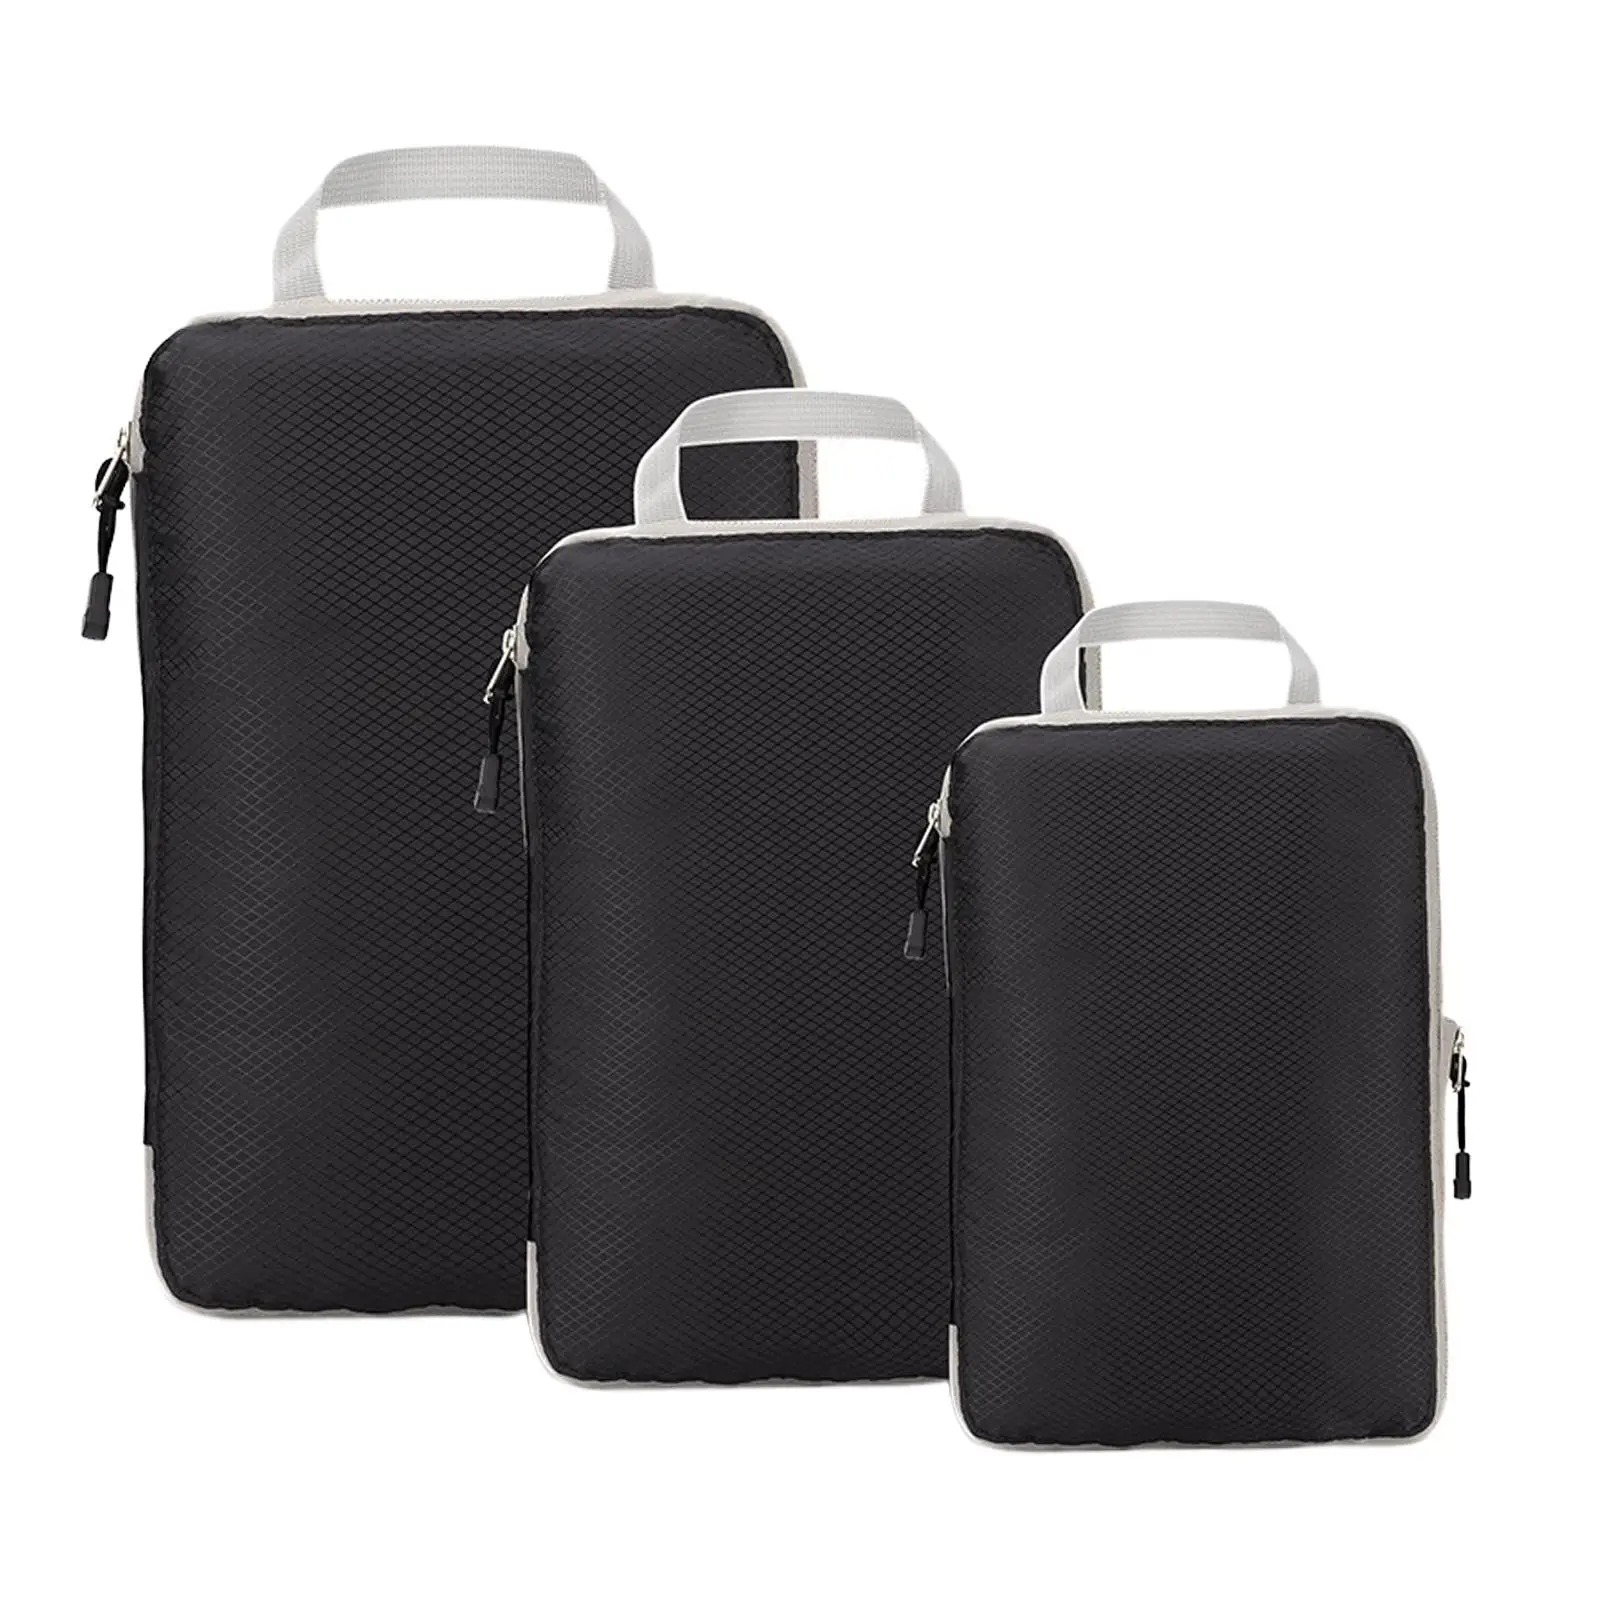 3Pcs Travel Compressible Packing Cubes with Handbag Men Women for Suitcases